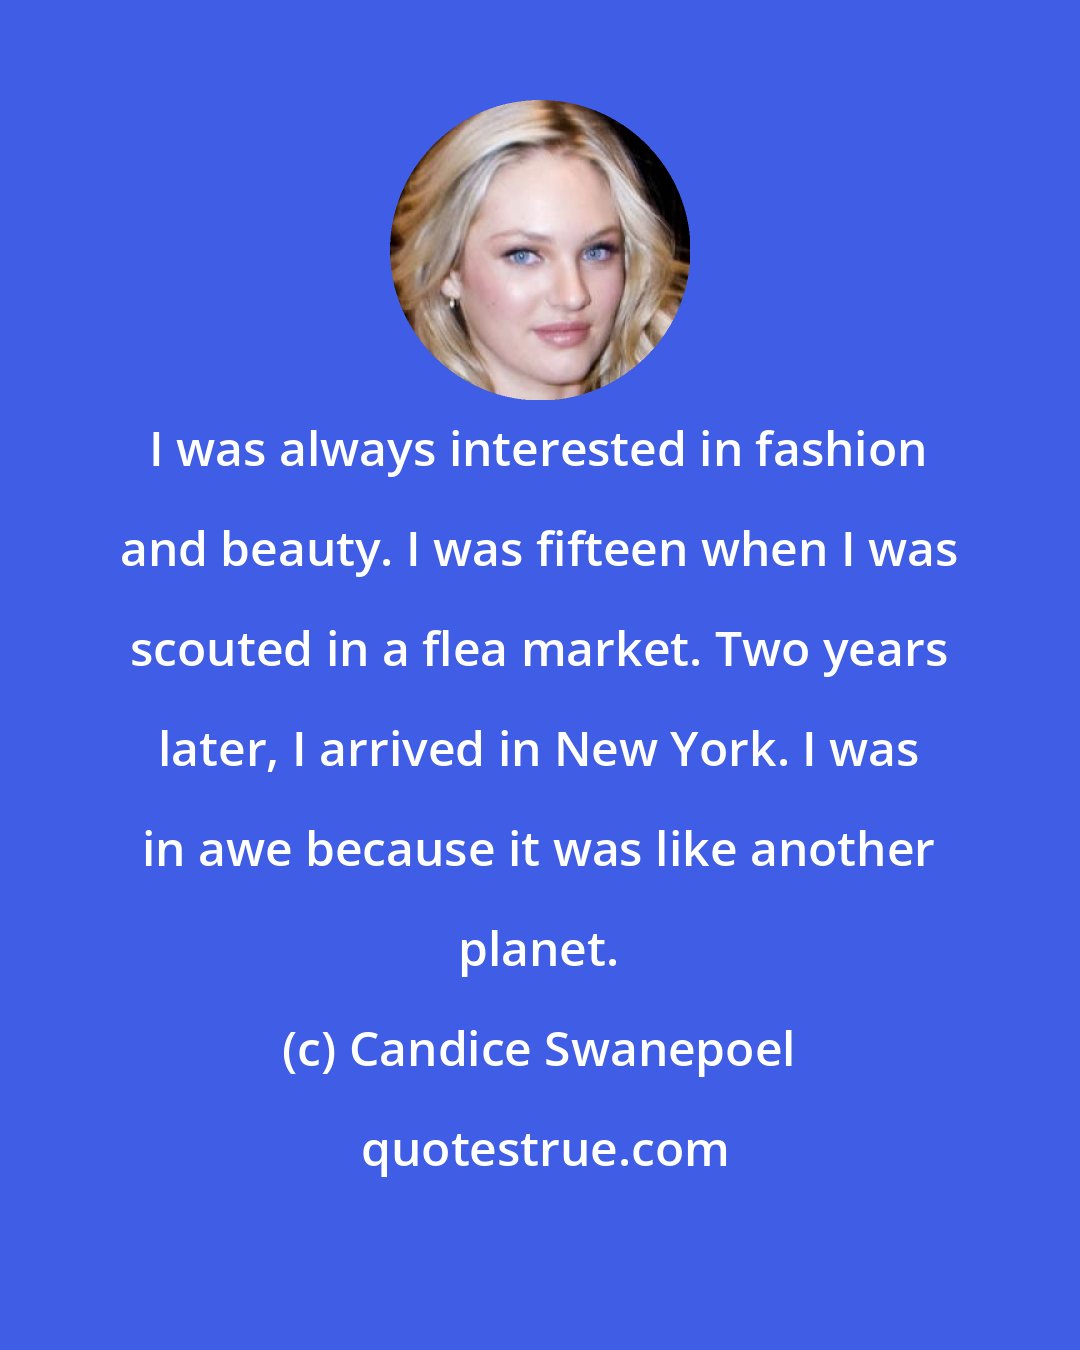 Candice Swanepoel: I was always interested in fashion and beauty. I was fifteen when I was scouted in a flea market. Two years later, I arrived in New York. I was in awe because it was like another planet.